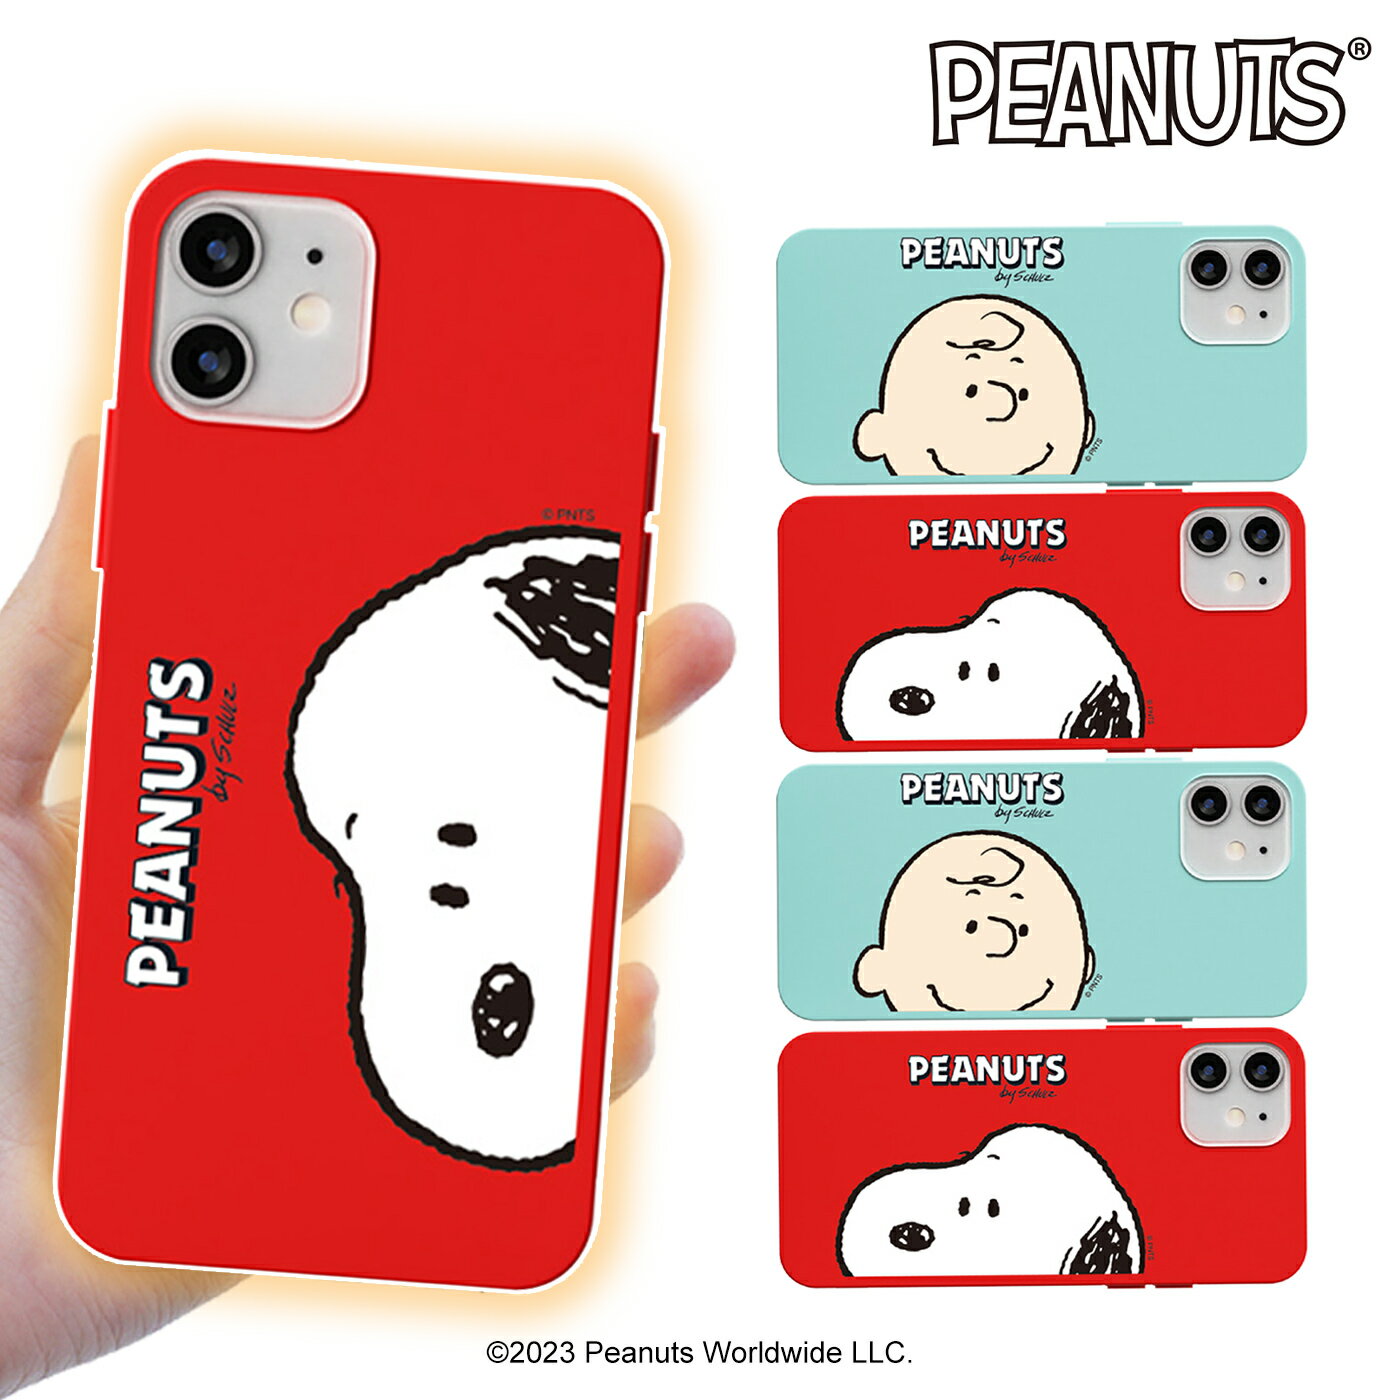 PEANUTS SNOOPY Xk[s[ iPhone15 Pro MAX s[ibc  ObY iPhone14 iPhone13 iPhone12 iPhoneX iPhone7 \tg VR X}zP[X ~[WA 摜  ObY ǎ iface a iPhoneP[X TPU BIG FACE rbO tFCX 